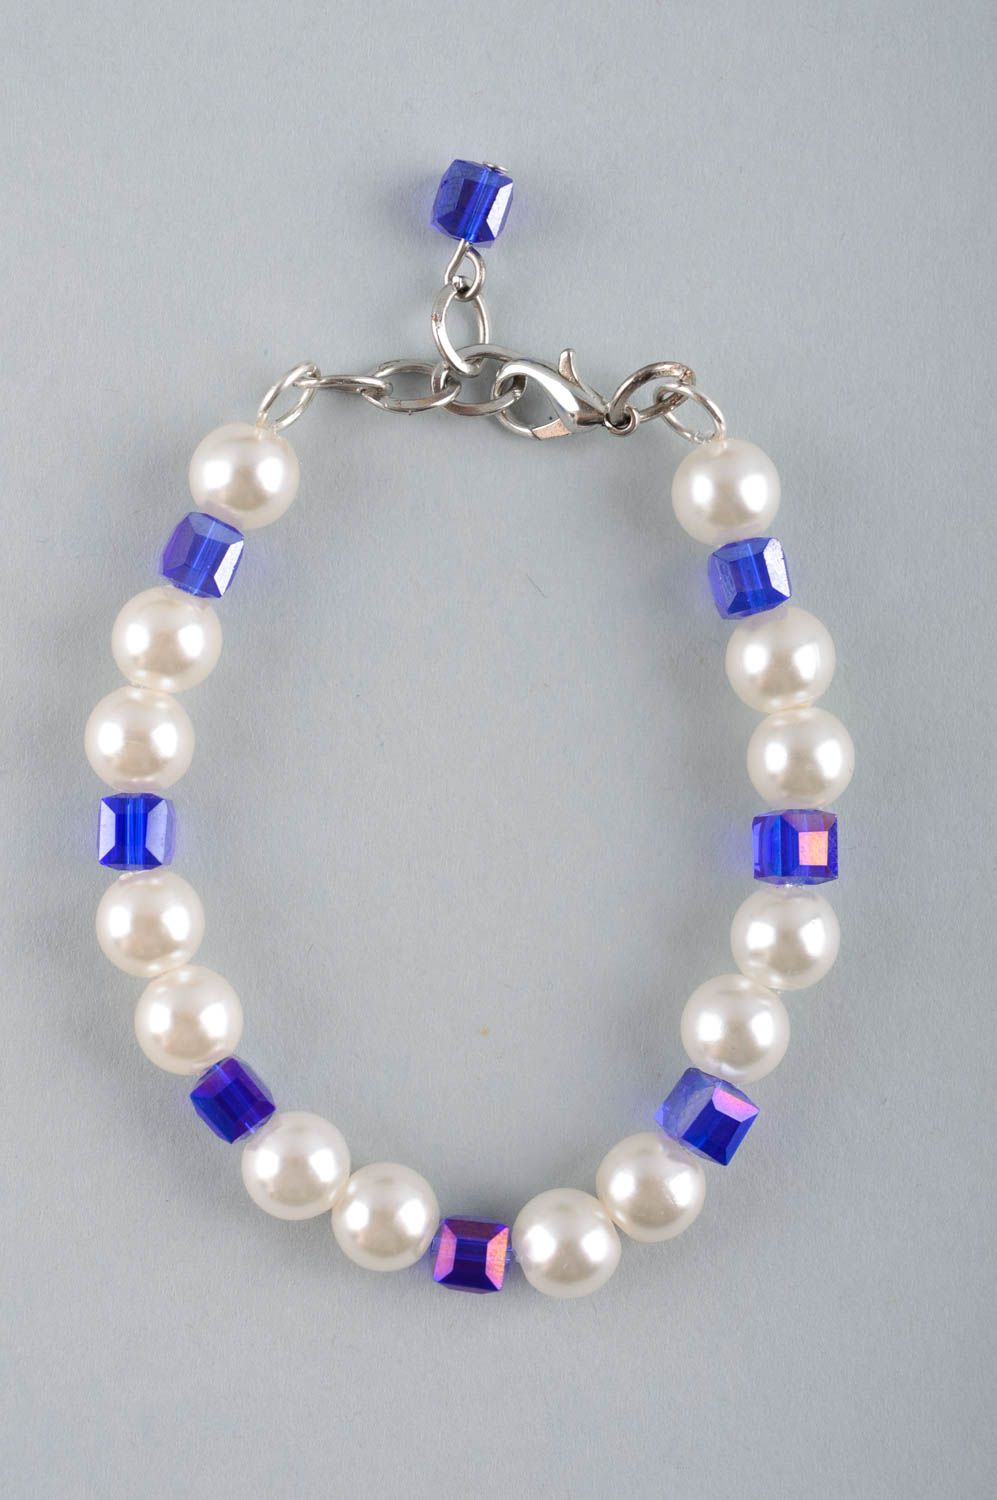 White and blue beads chain bracelet for young girls photo 2